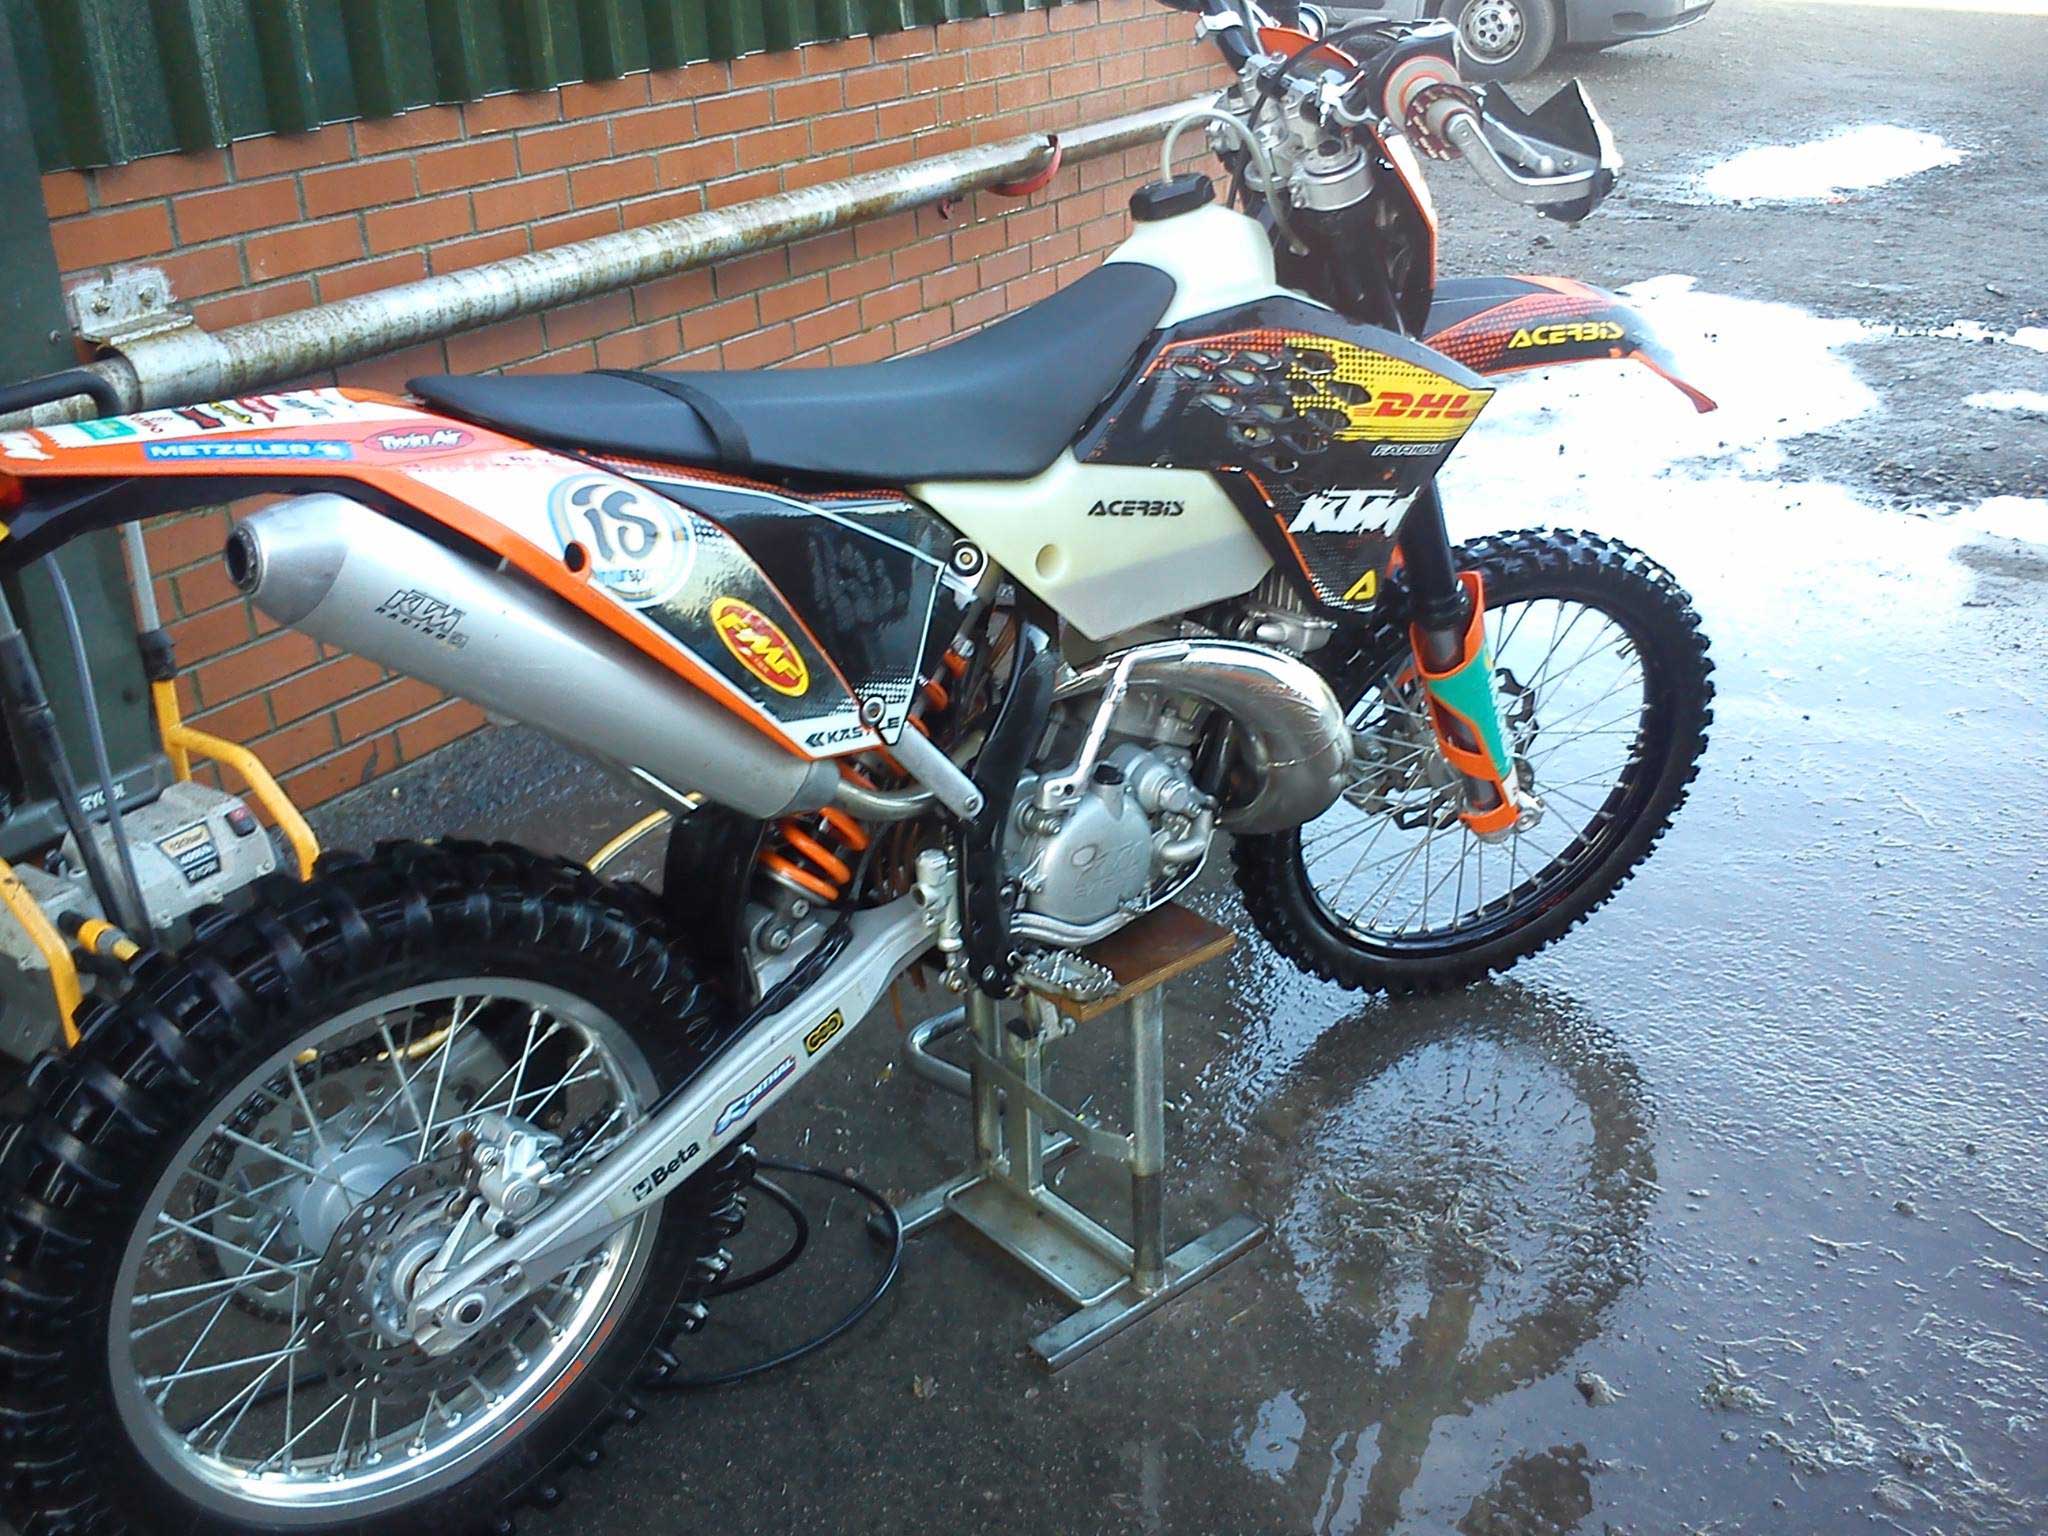 motorbike after cleaning with After Fun cleaning products